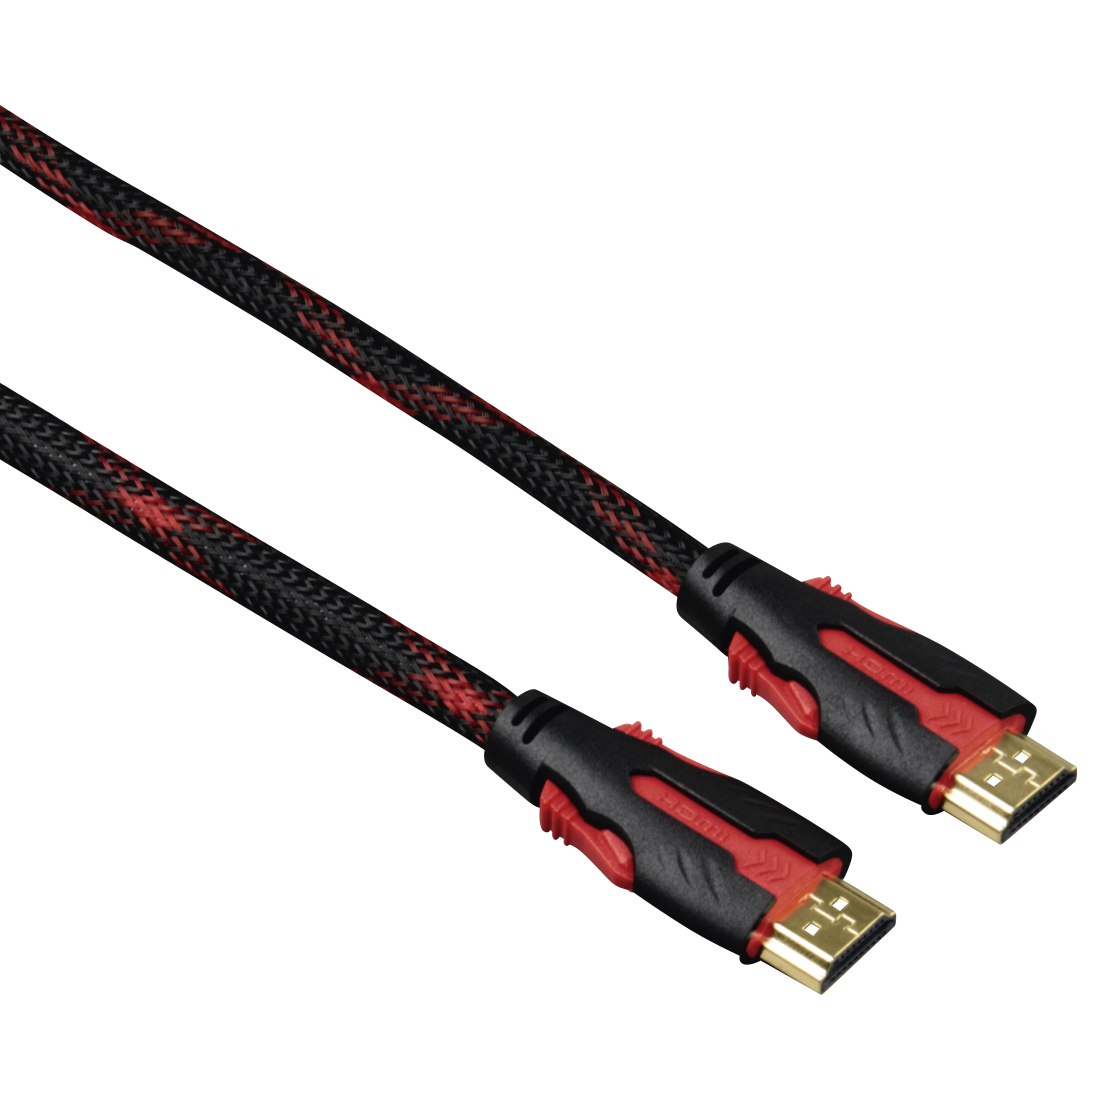 Painkiller Officer lineup Hama "High Quality" High Speed HDMI™ Cable for PS3, Ethernet, 5 m